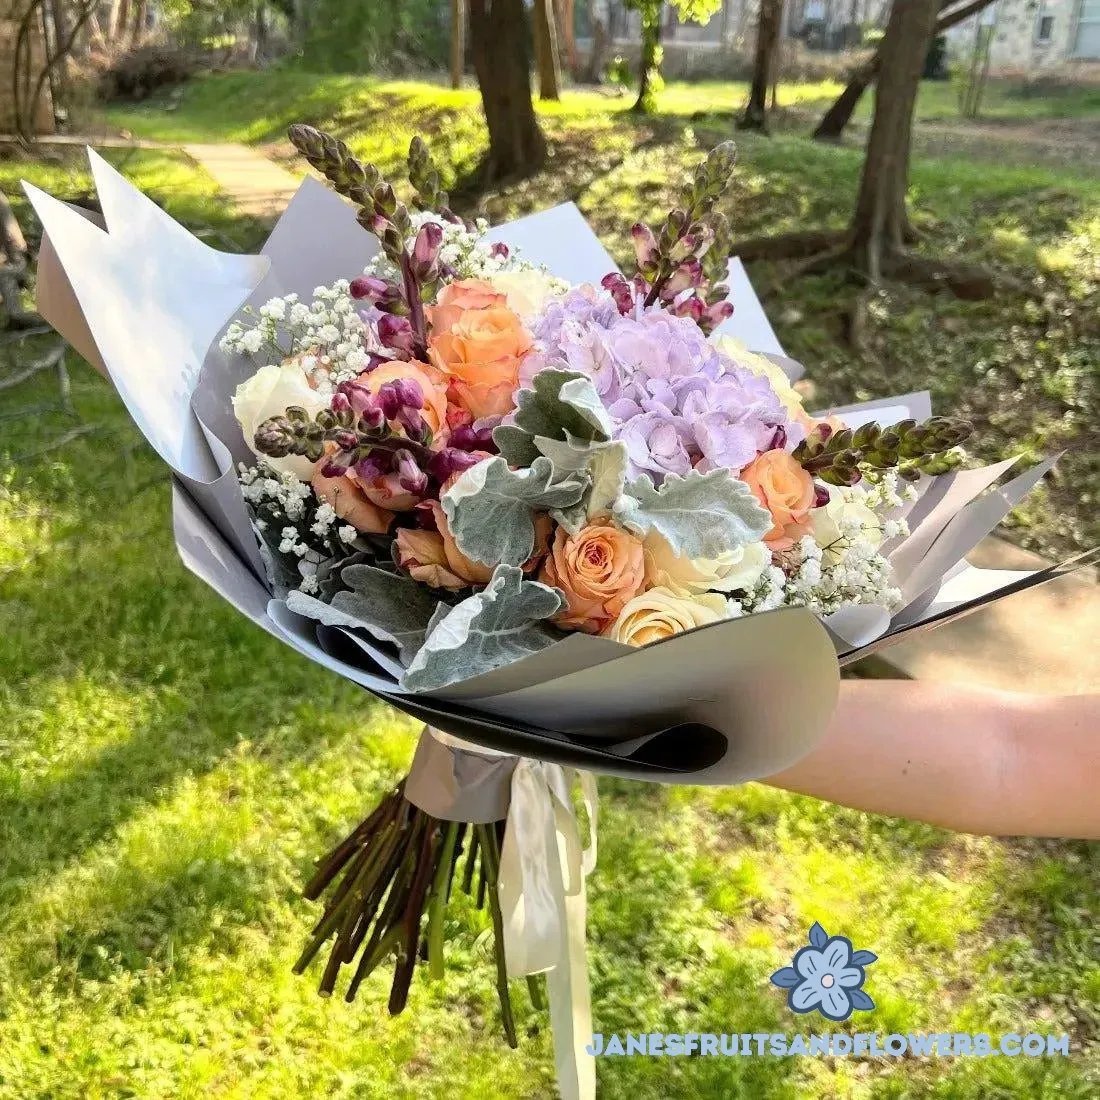 Tender Moments Bouquet - Jane's Fruits And Flowers